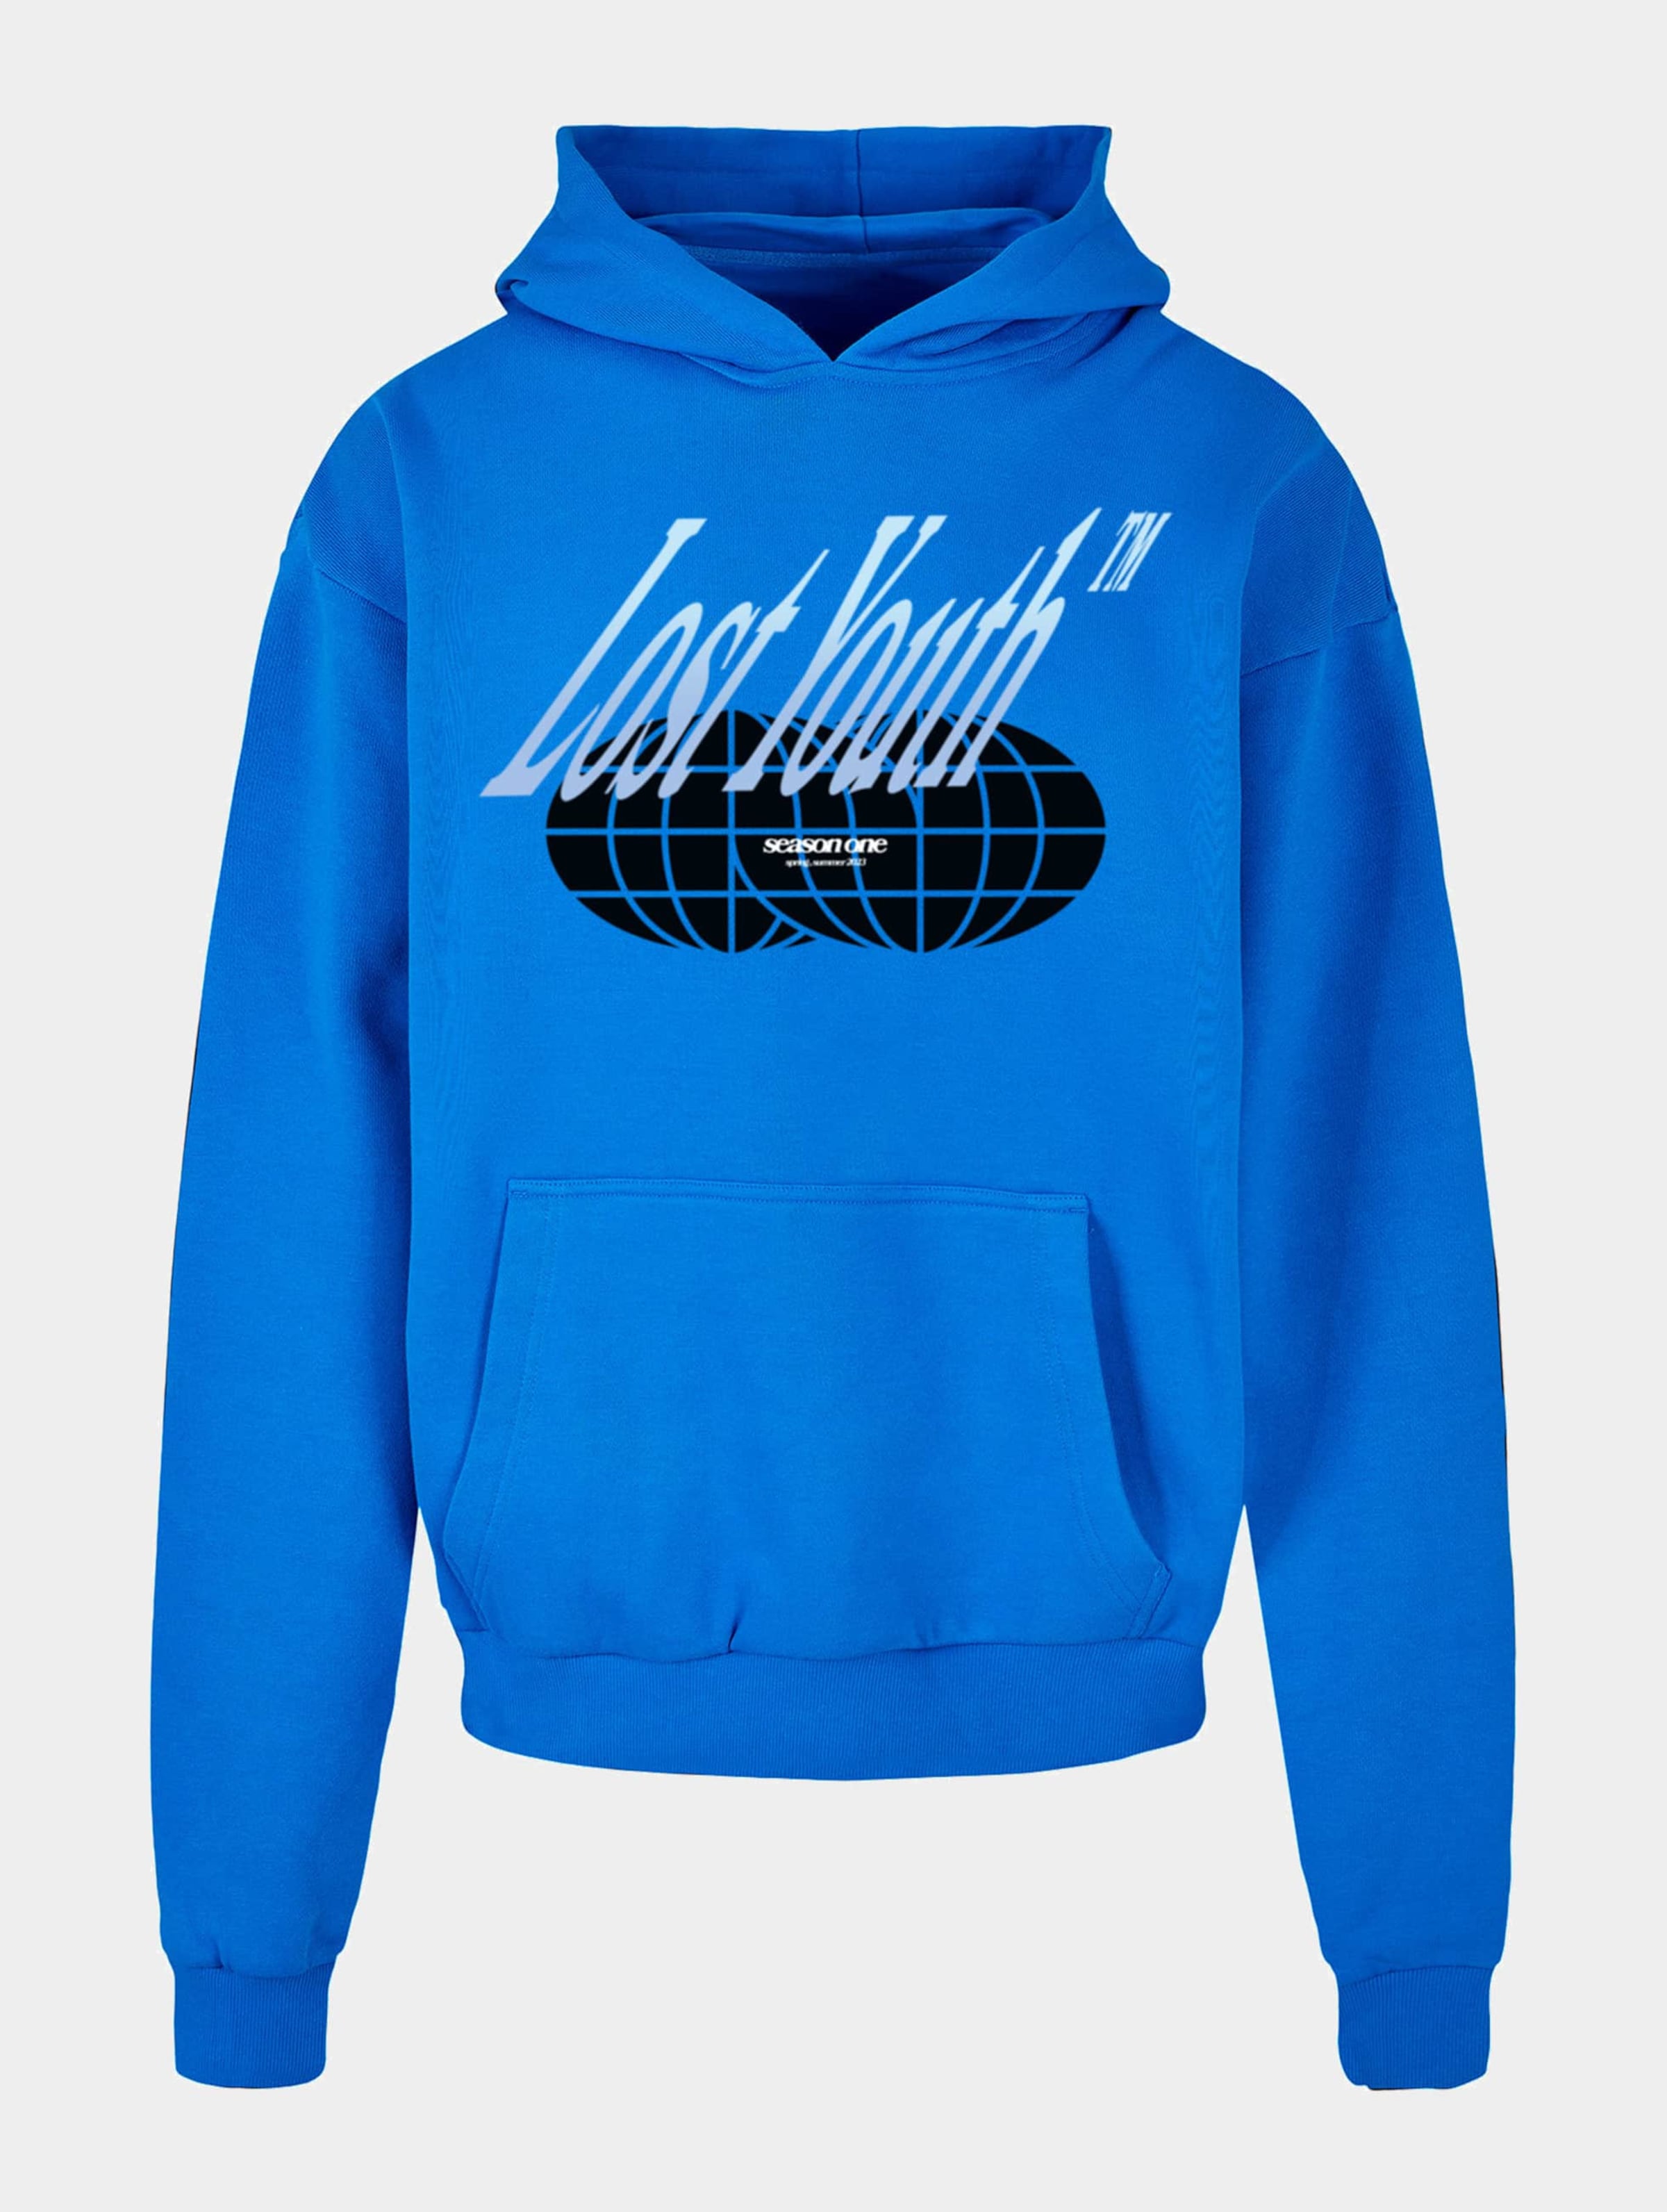 Lost Youth LY HOODY - ICON V.5 Mannen op kleur blauw, Maat 3XL